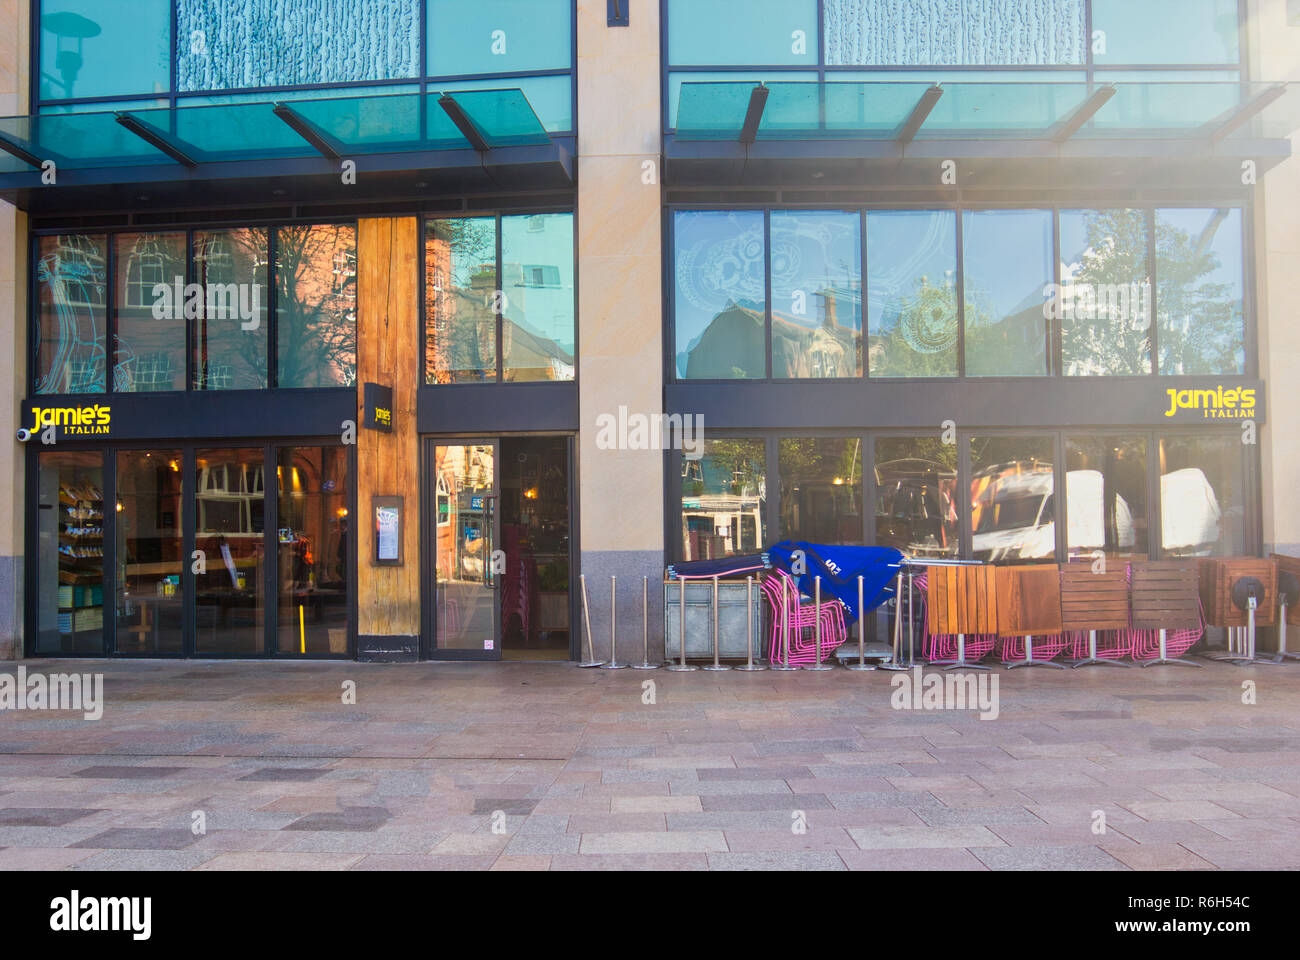 Tables outside Jamie's Italian restaurant as it prepares to open, Cardiff, Wales, United Kingdom Stock Photo